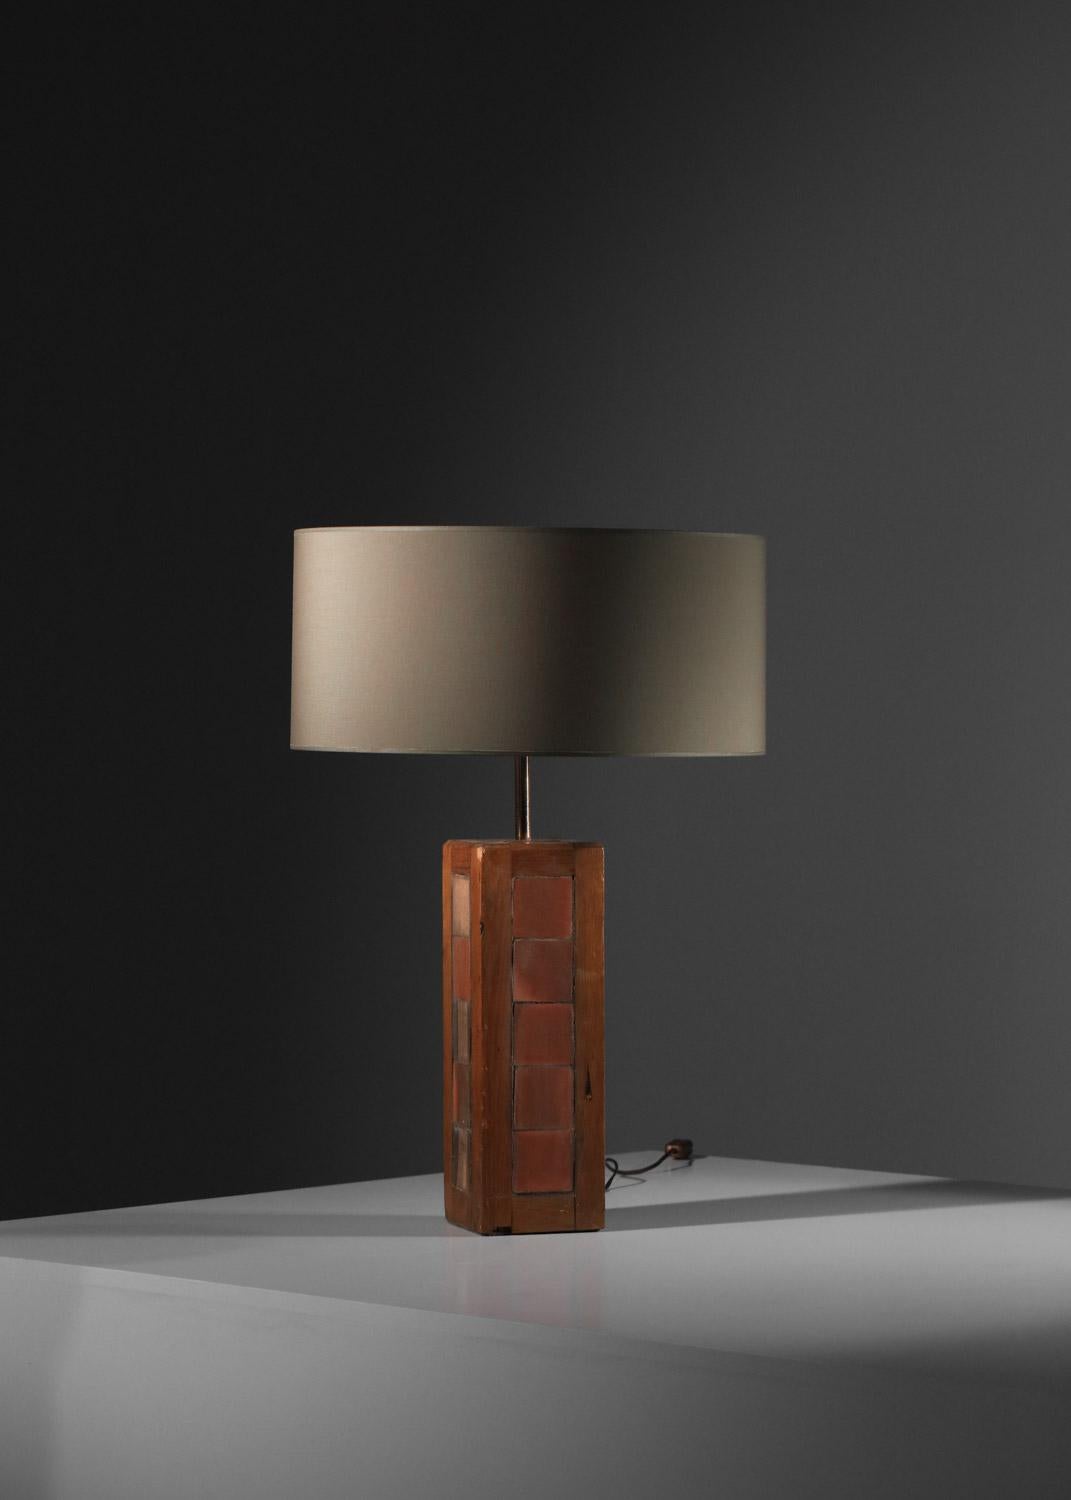 Hand-Crafted large table lamp in oak & ceramic tile French provencal popular art unique piece For Sale